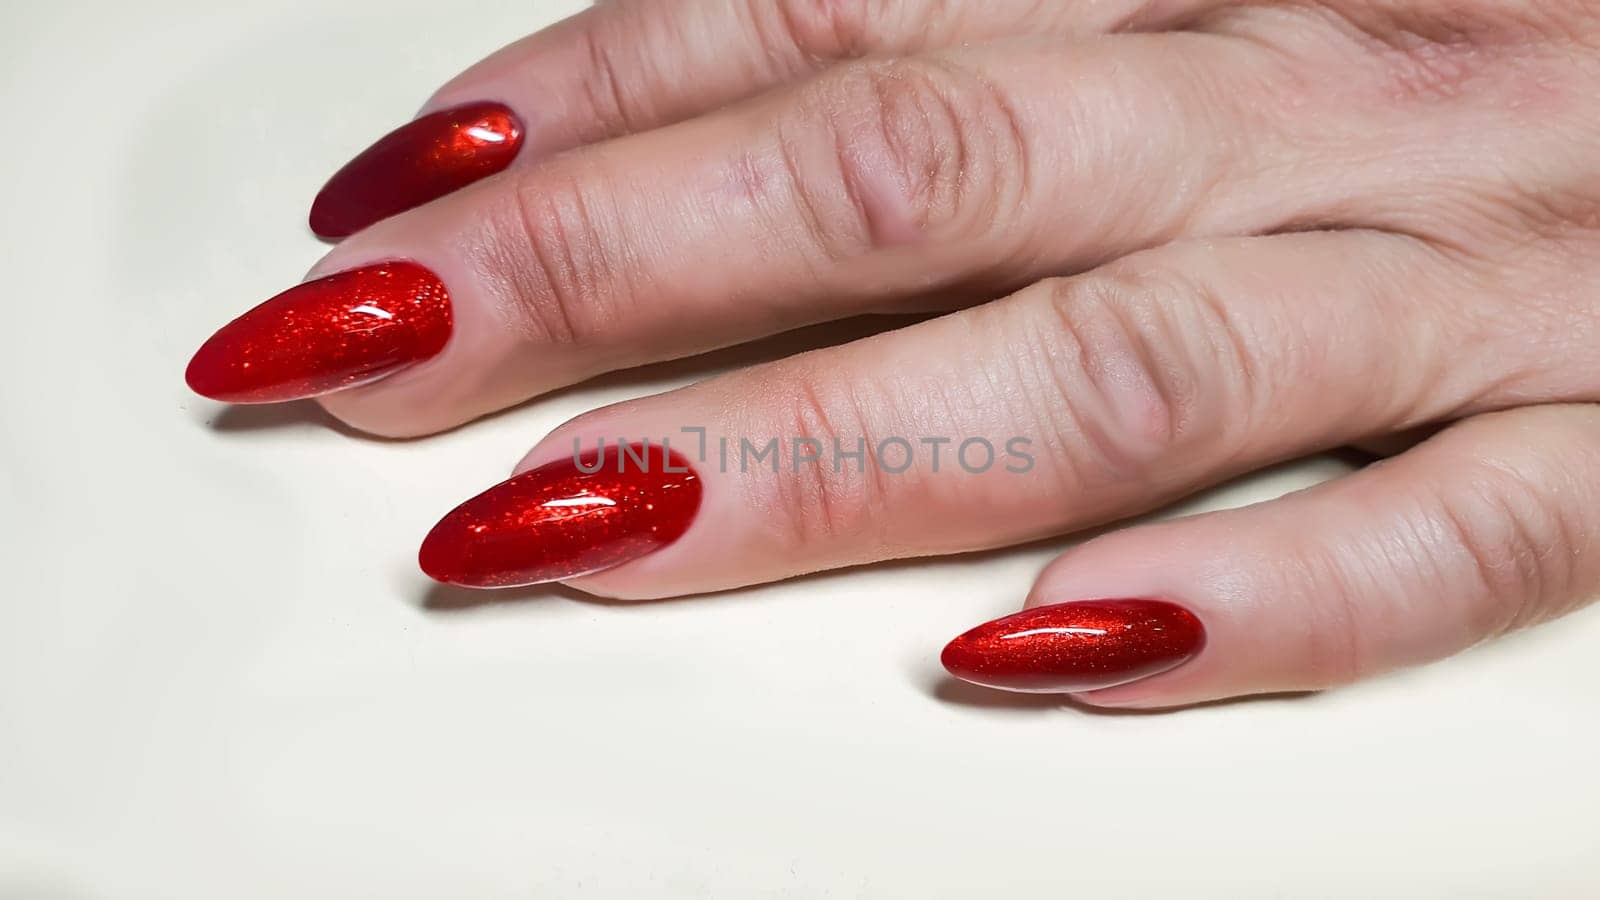 Manicure and nail extensions with acrylic and gel. The design is made with shiny gel polishes. Copy space